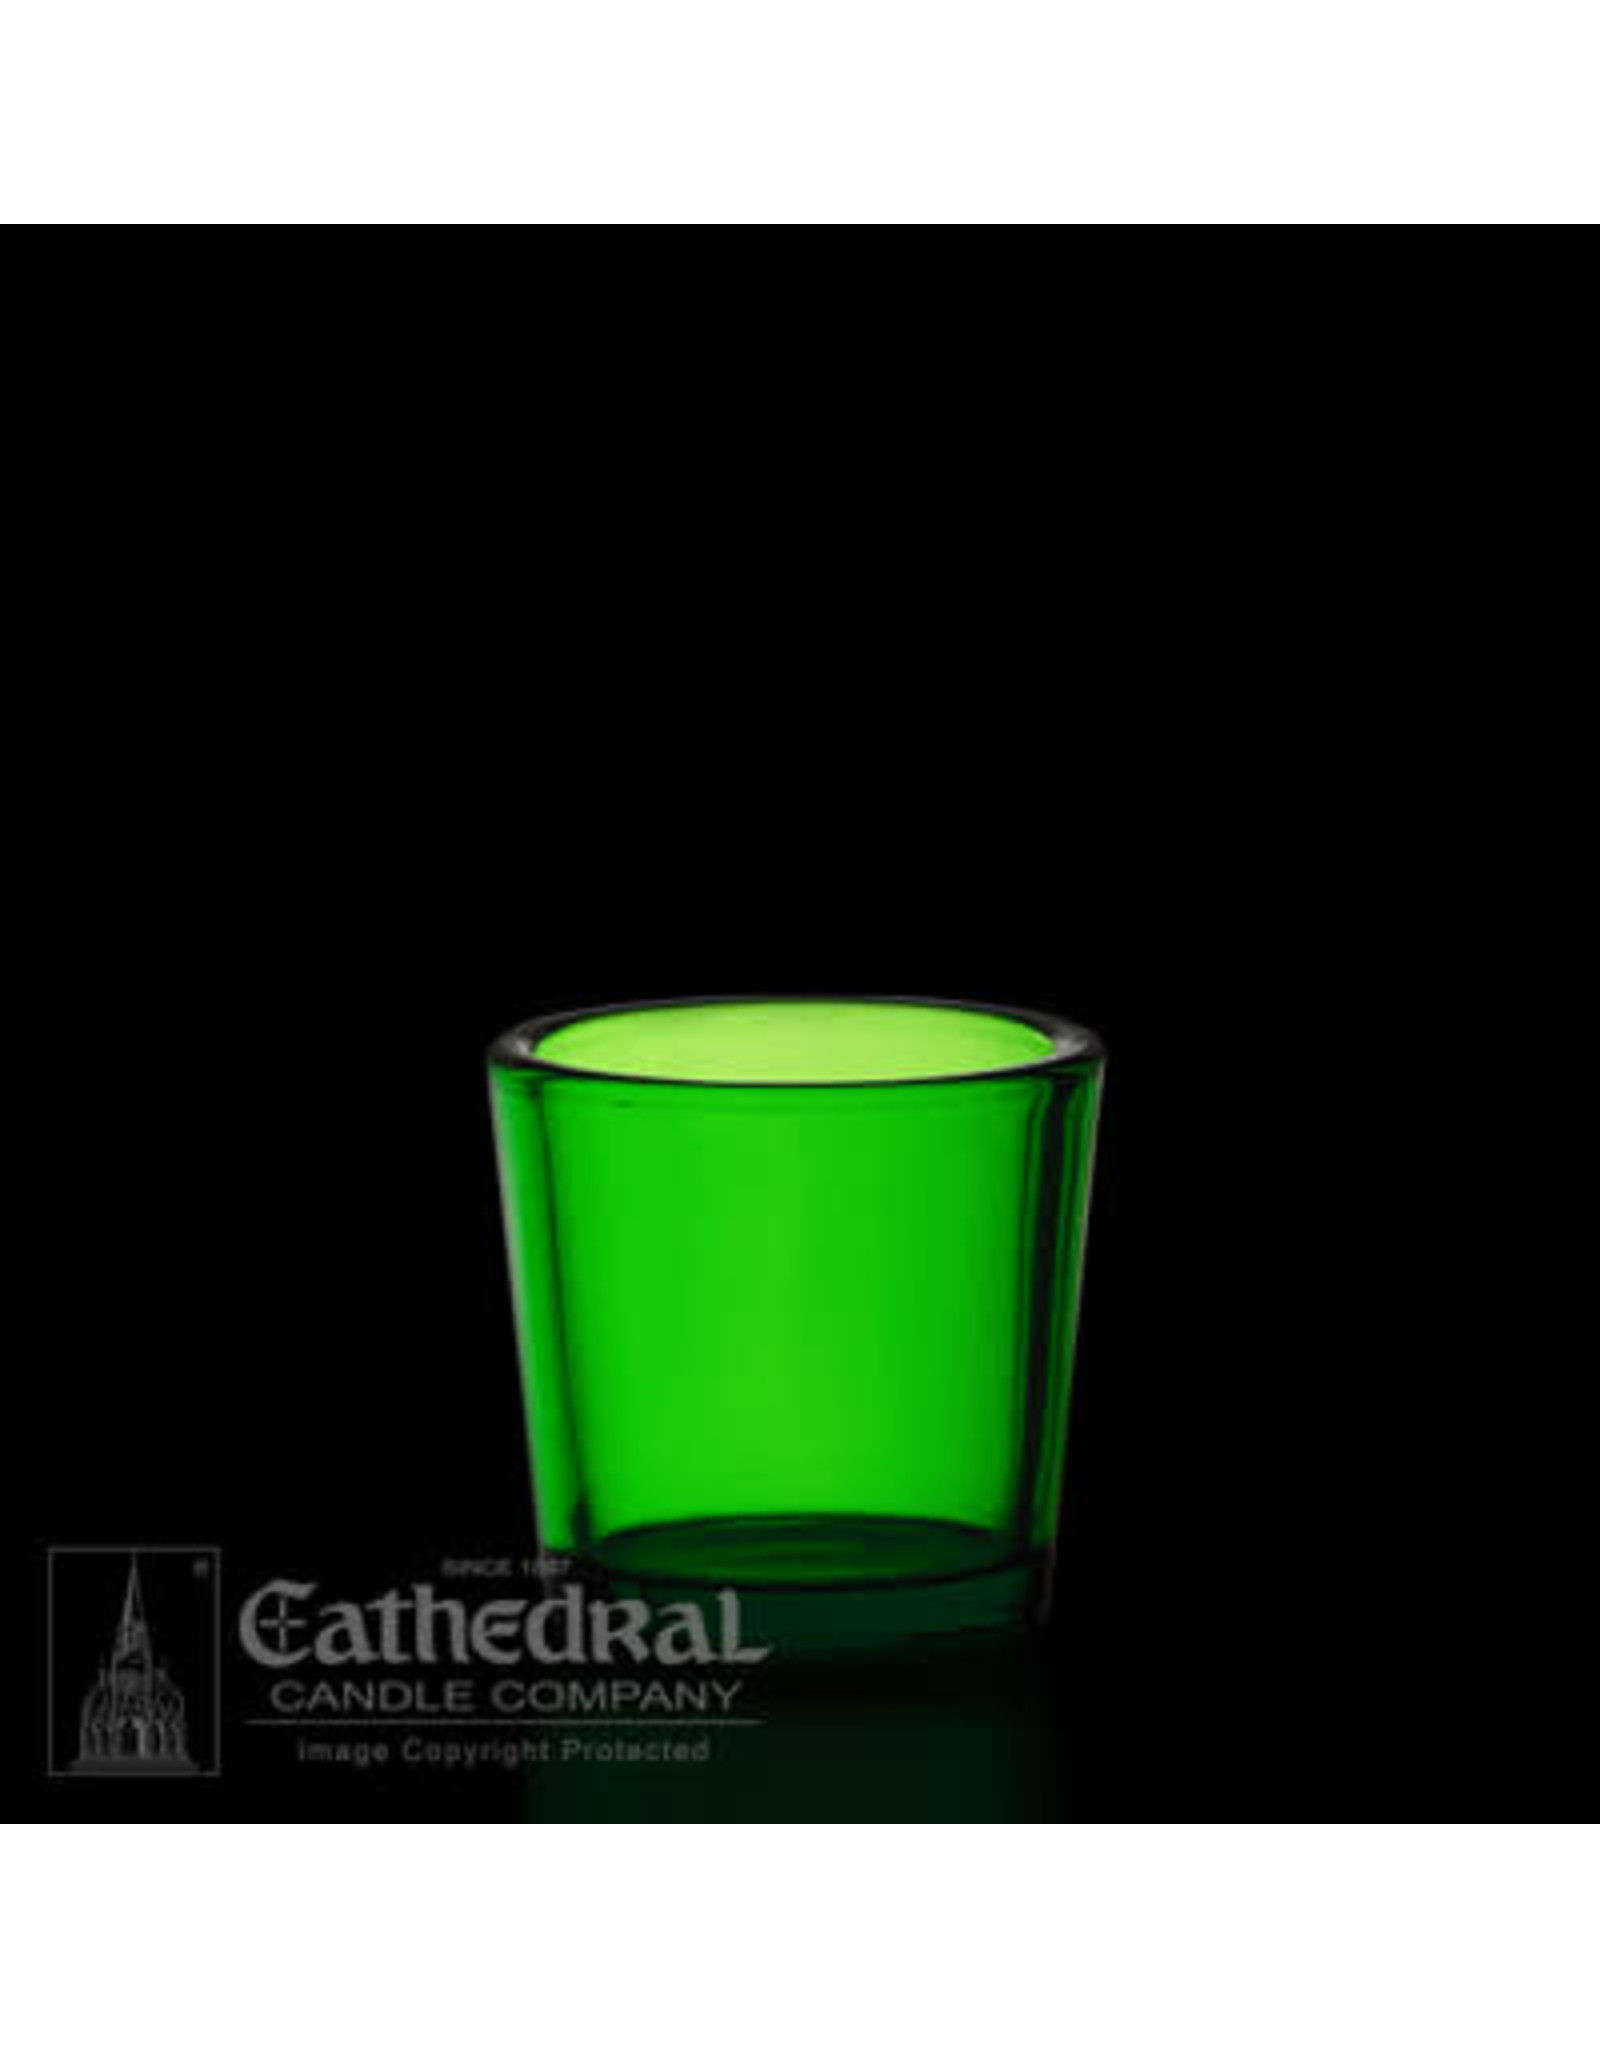 Cathedral Candle Votive Light Glass - Green, 2-10 Hour (Each)